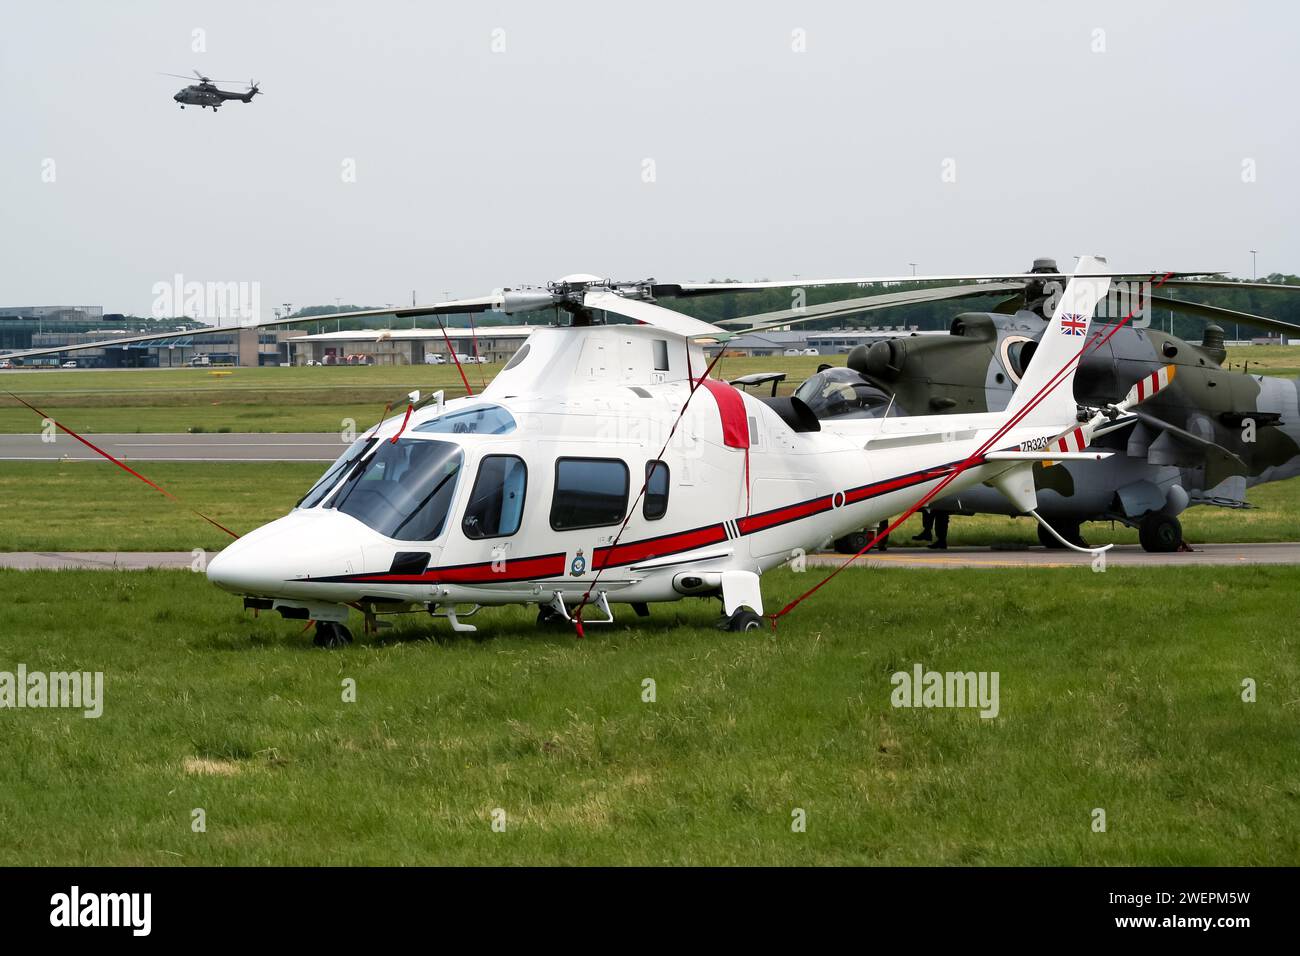 Royal Air Force AgustaWestland AW109E Power helicopter at Liege-Bierset airport. Liege, Belgium - May 13, 2007 Stock Photo